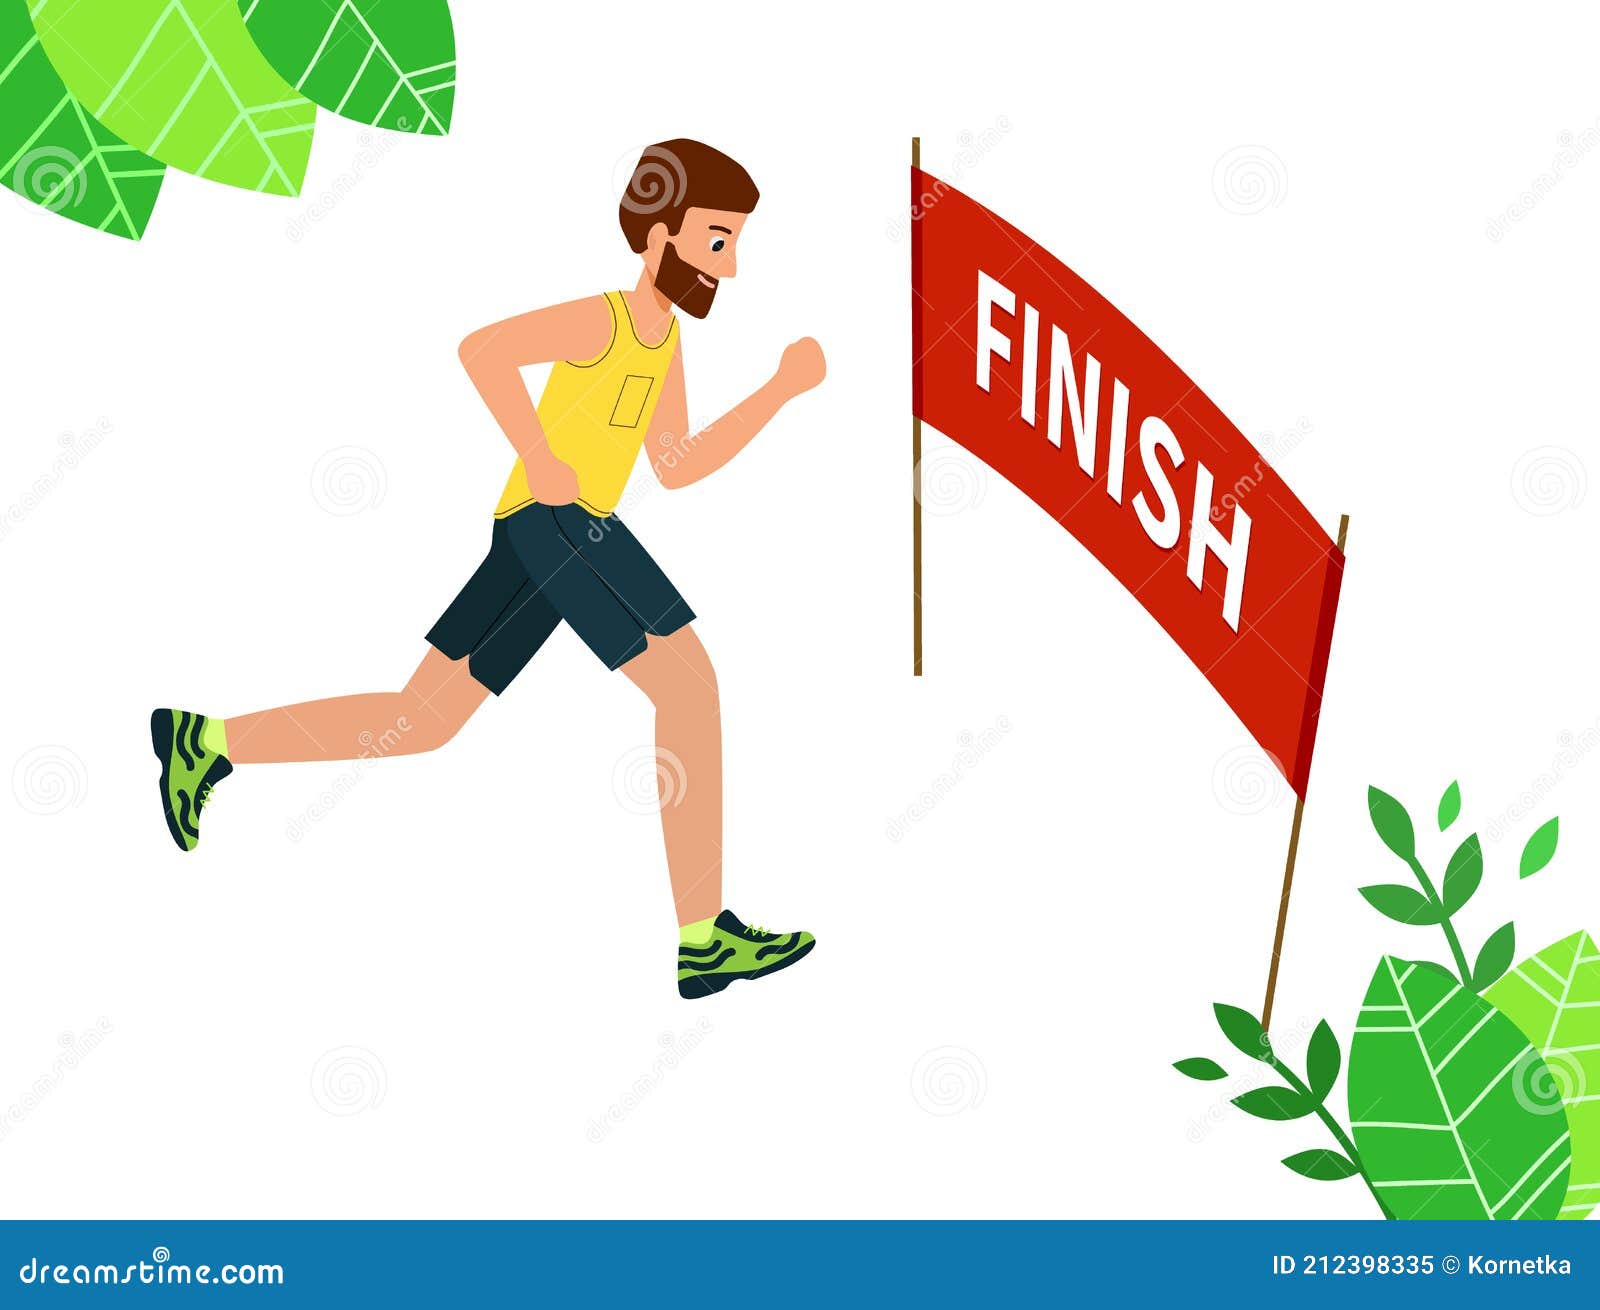 Runner Wins the Race, the Finish Line. Concept of Overcoming